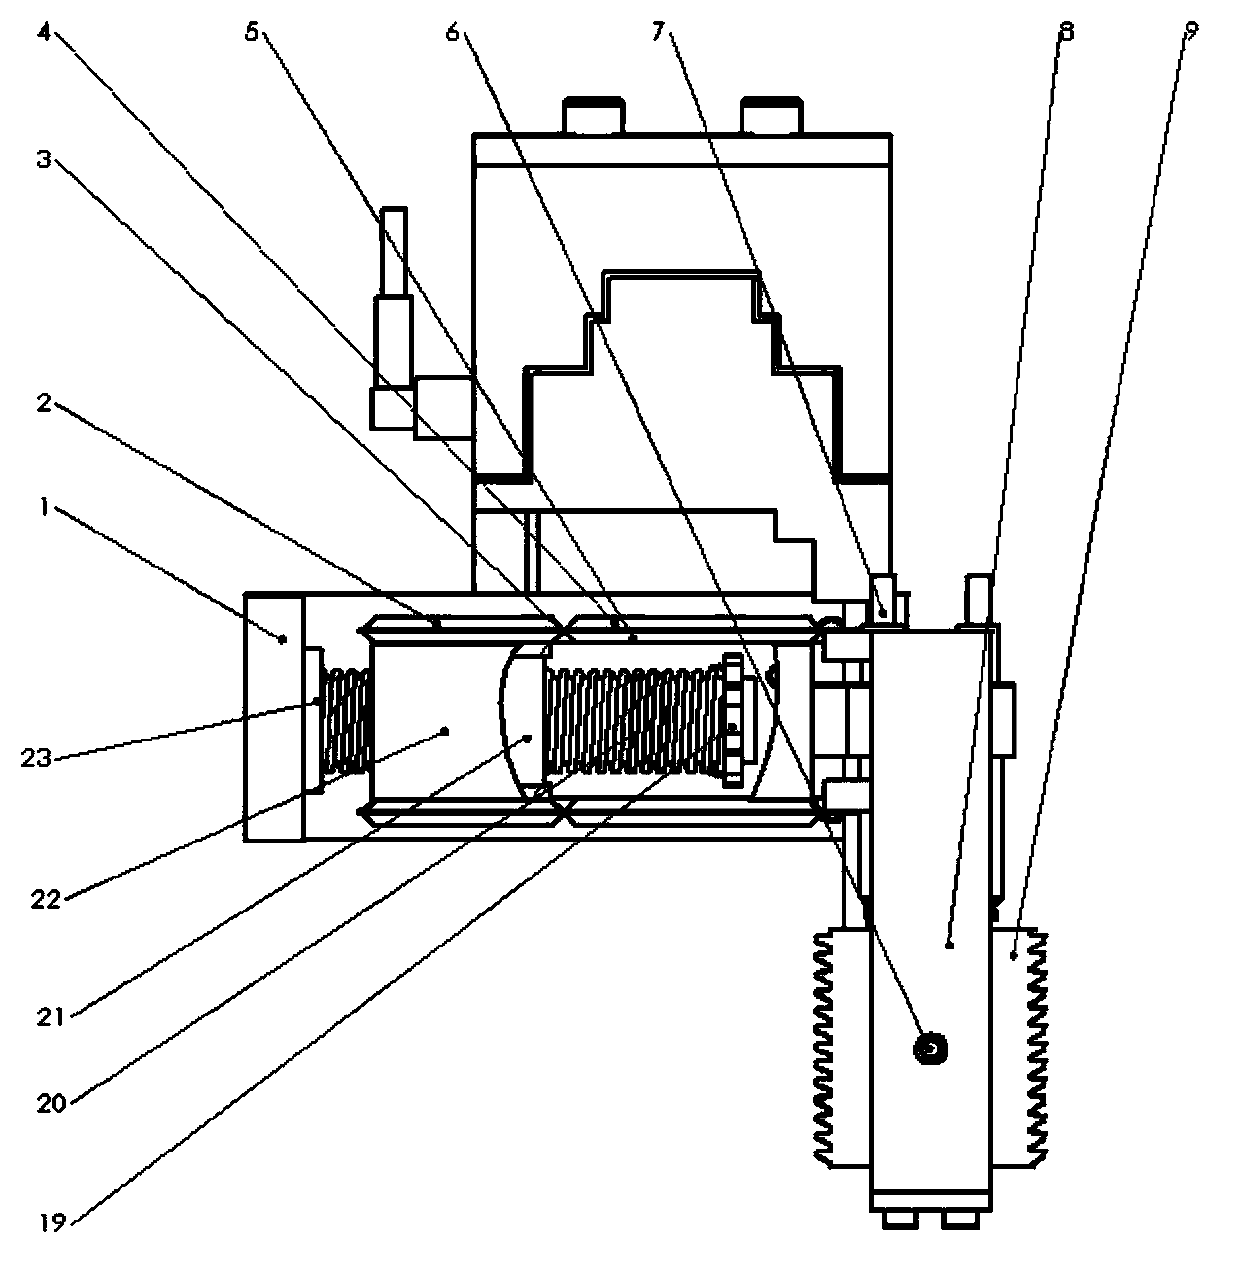 Measuring head calibration method of thread combined function dimensional measurement instrument